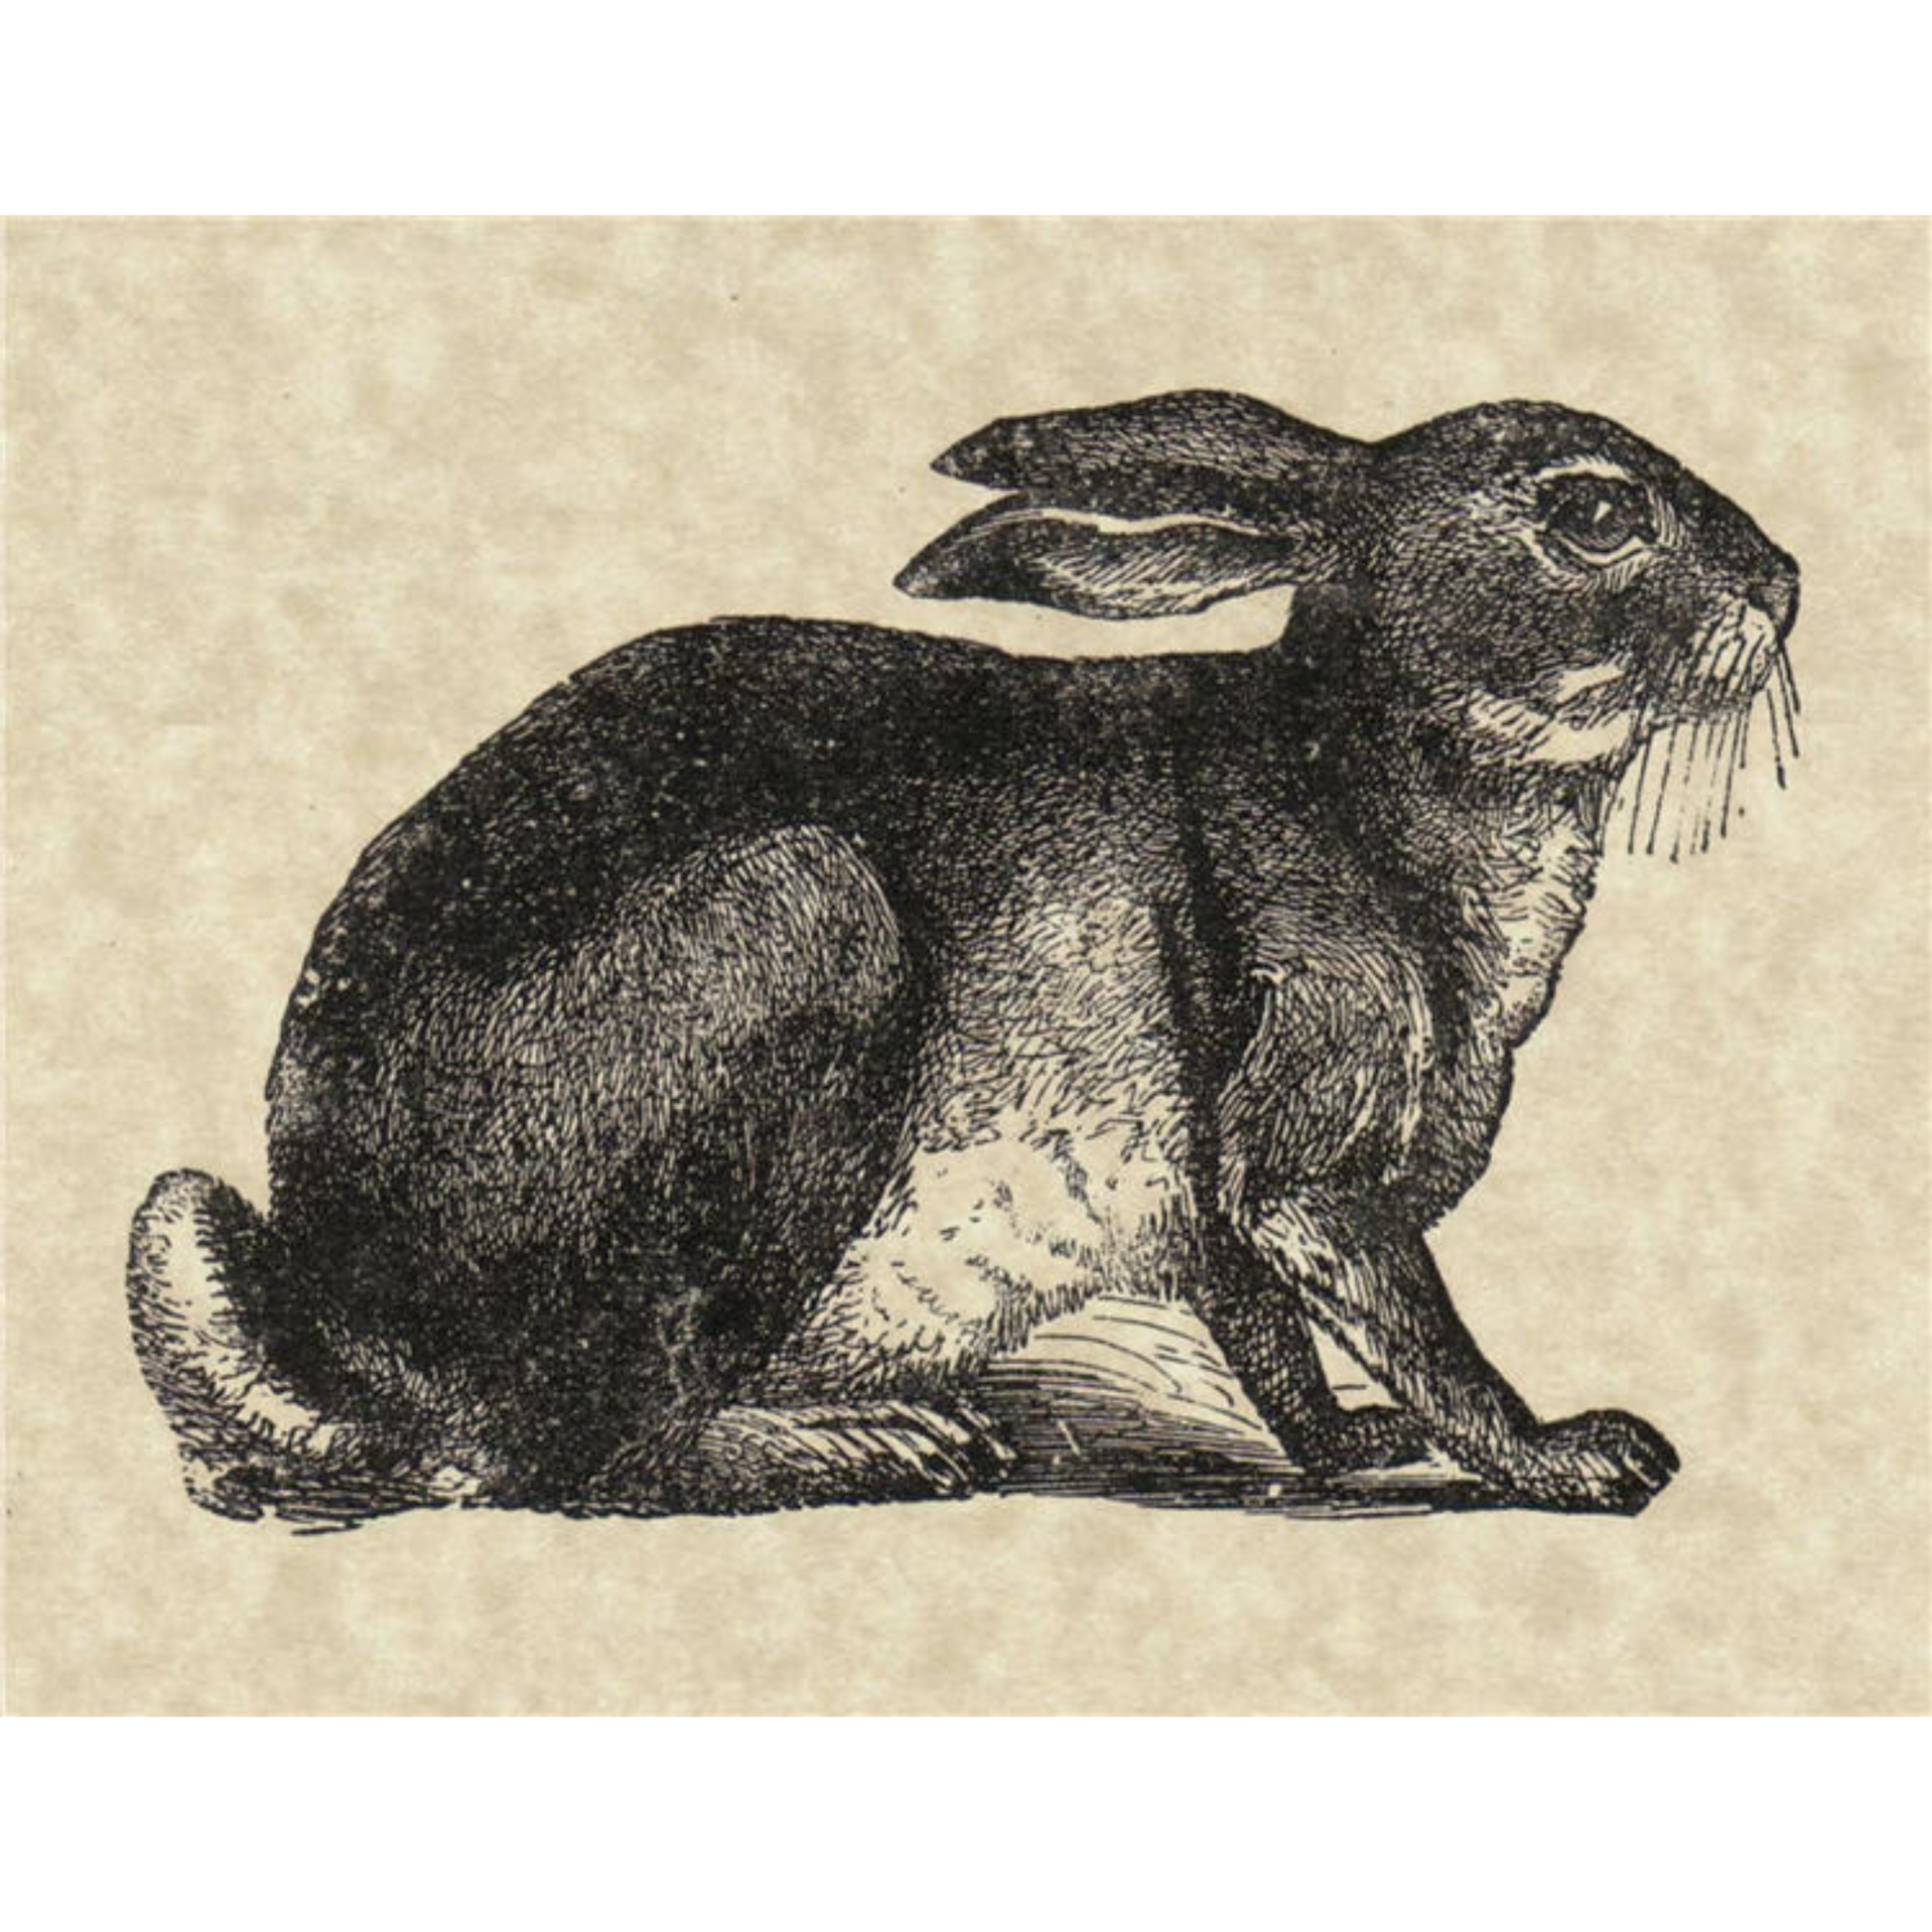 "Bunny - SPS441" decoupage paper by Monahan Papers. Available at Milton's Daughter.